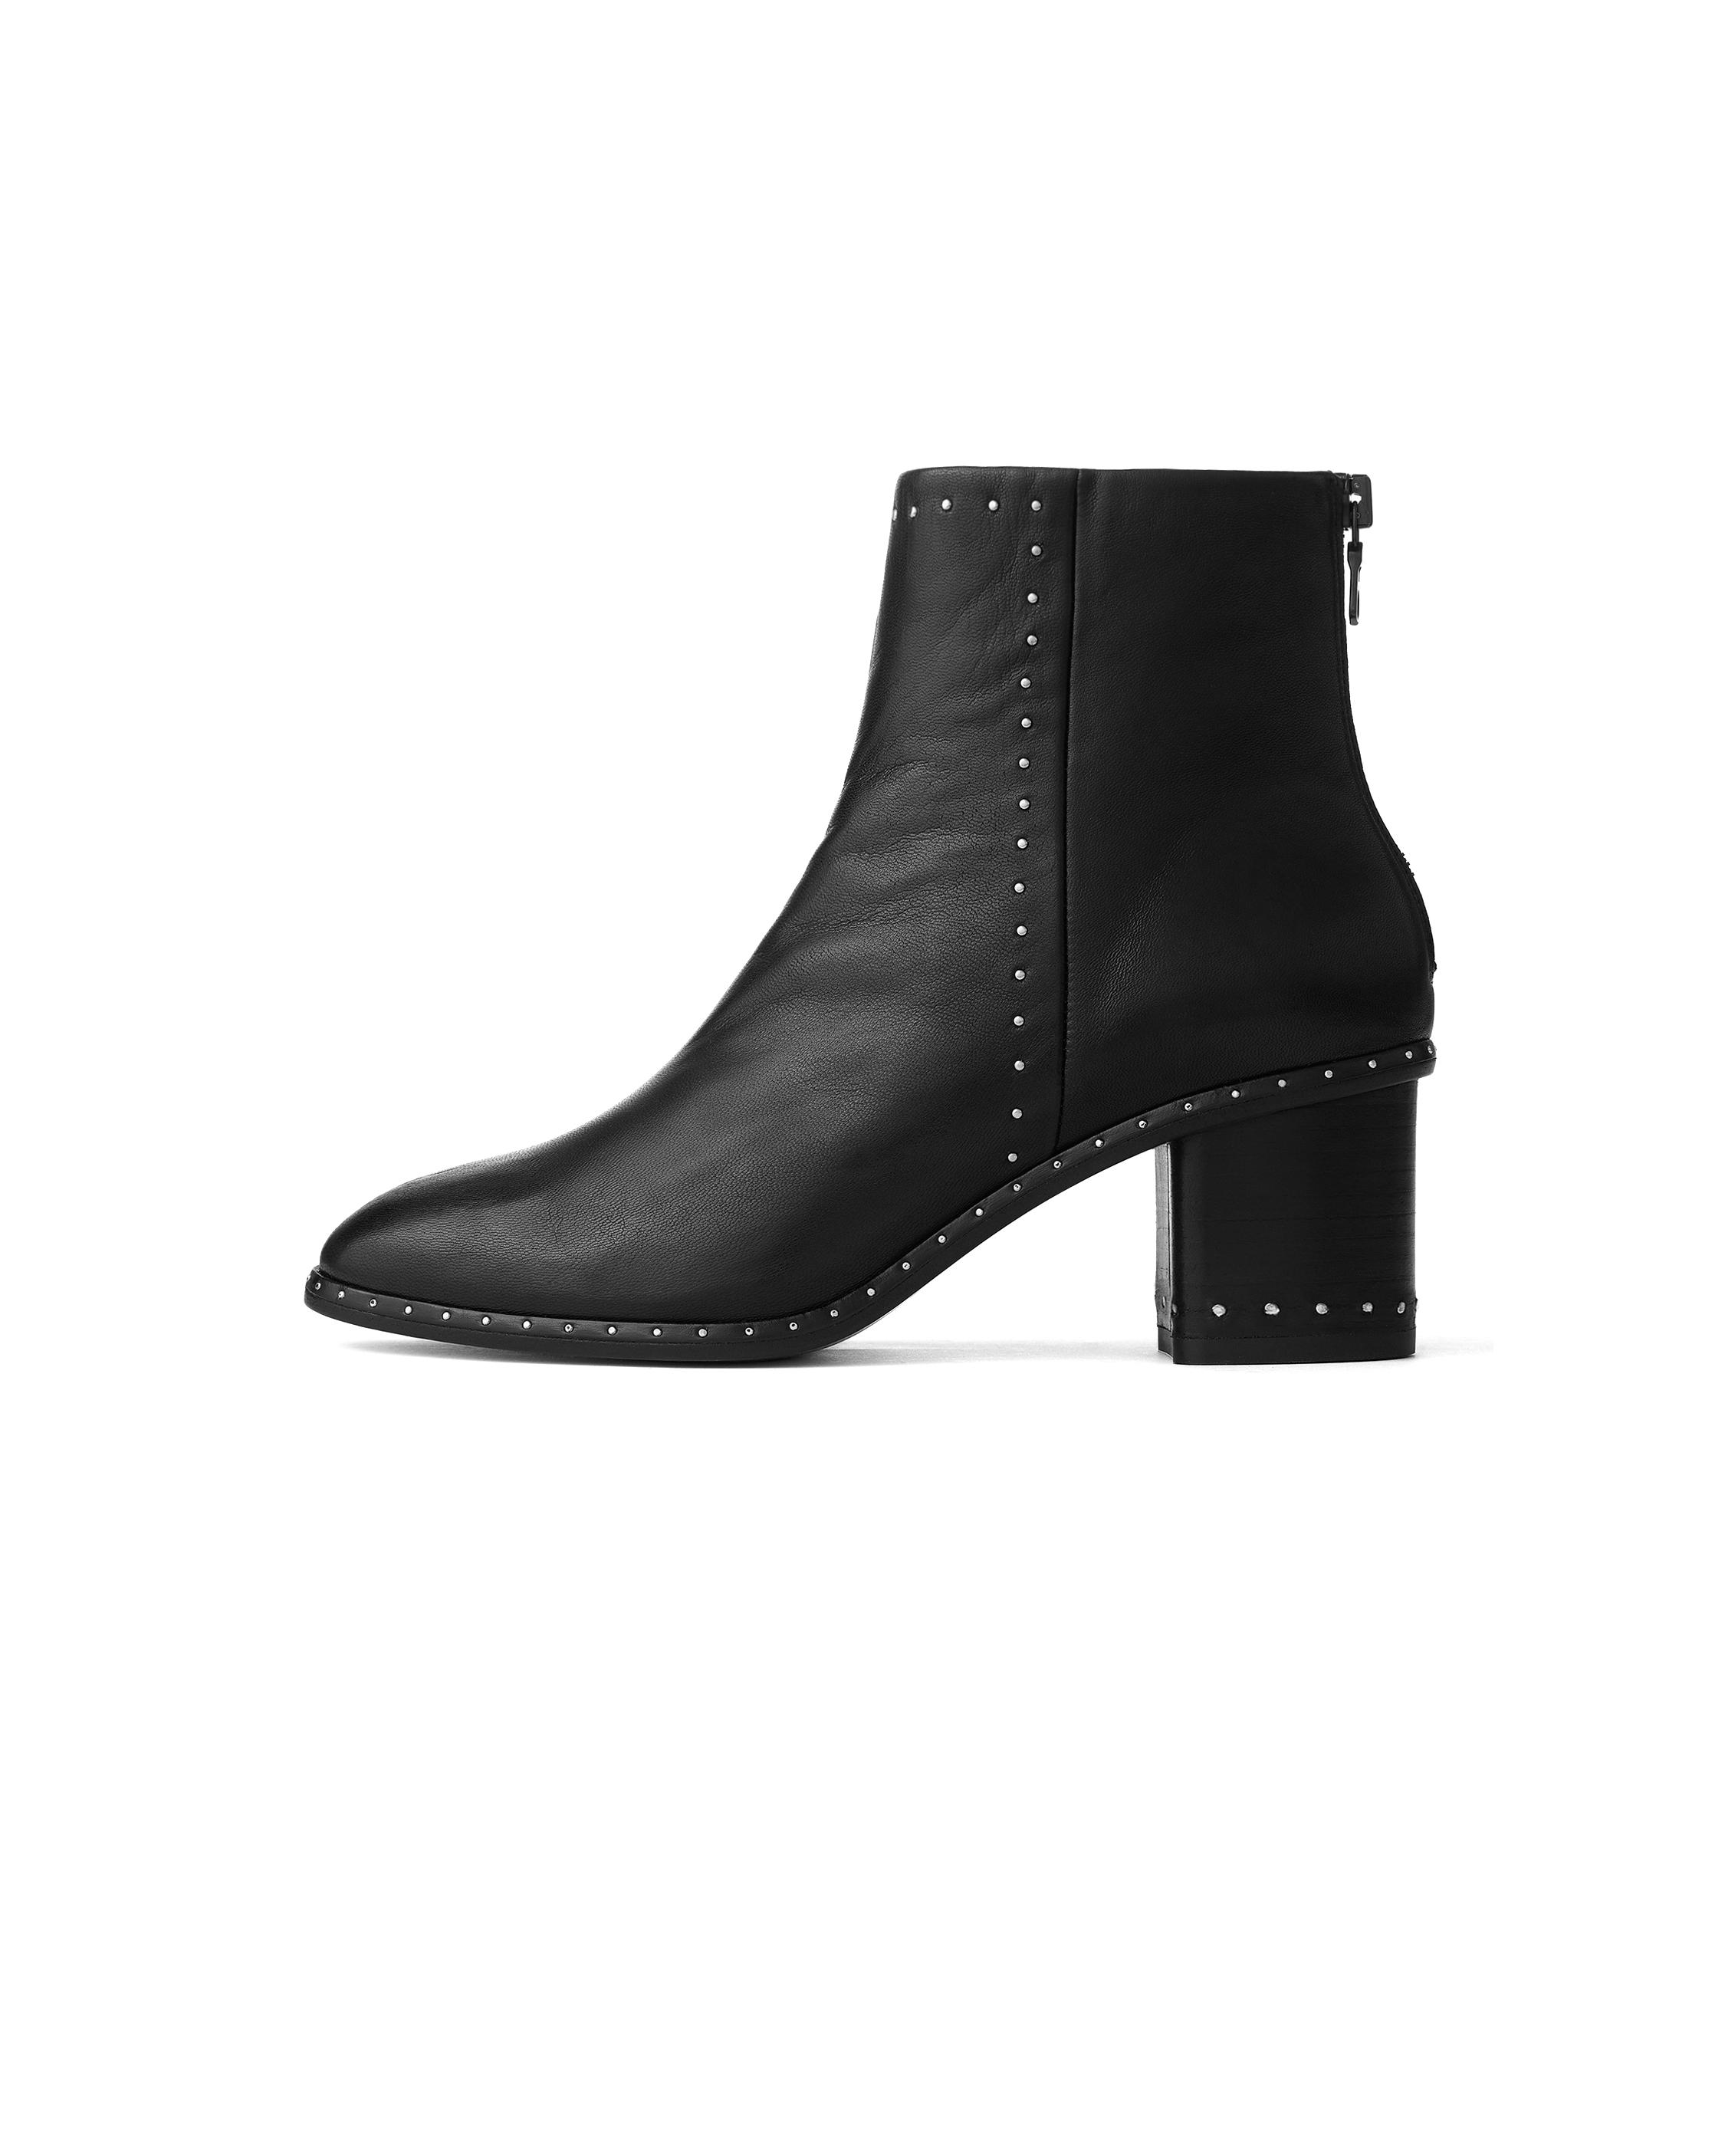 Boots: Ankle Cut & Perforated Suede to Cowboy & Block Heel in Iconic ...